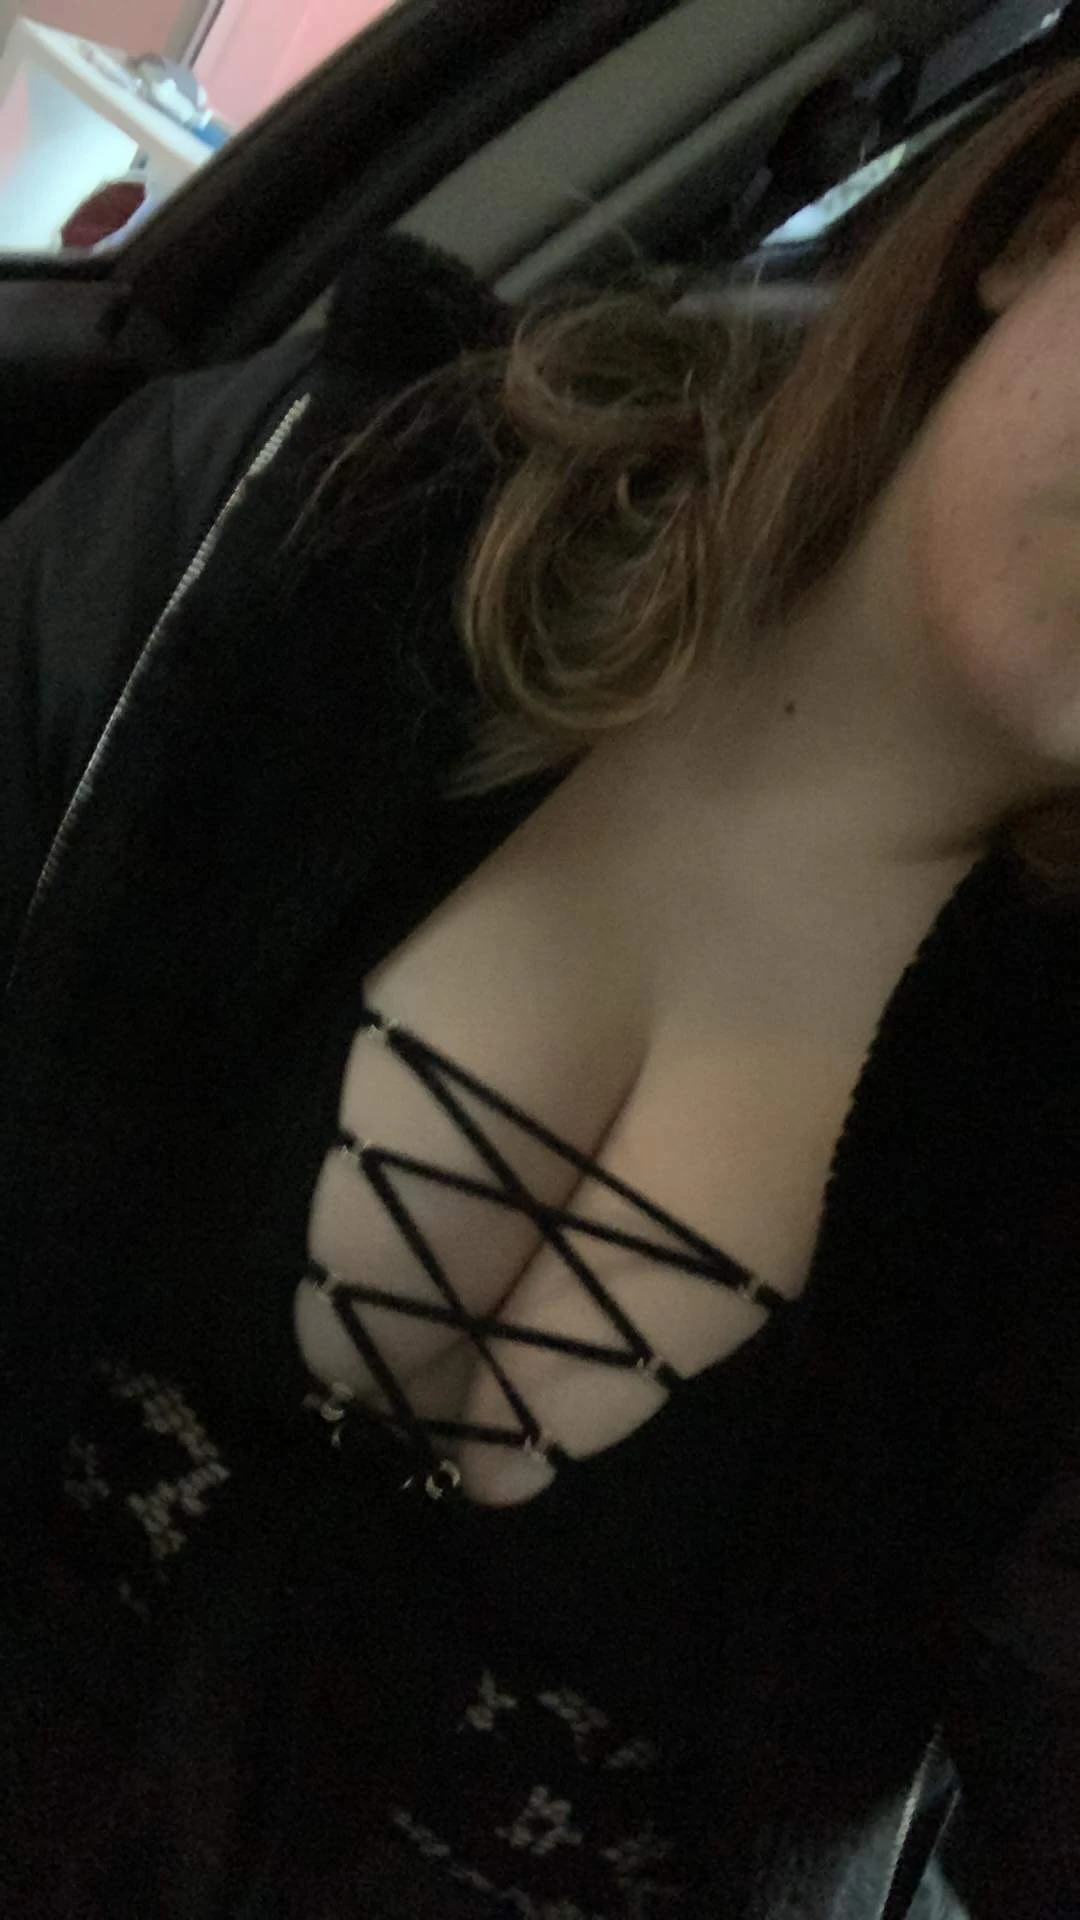 I'm at work and my girlfriend is out on a dinner date. She just sent me this pic of her outfit.